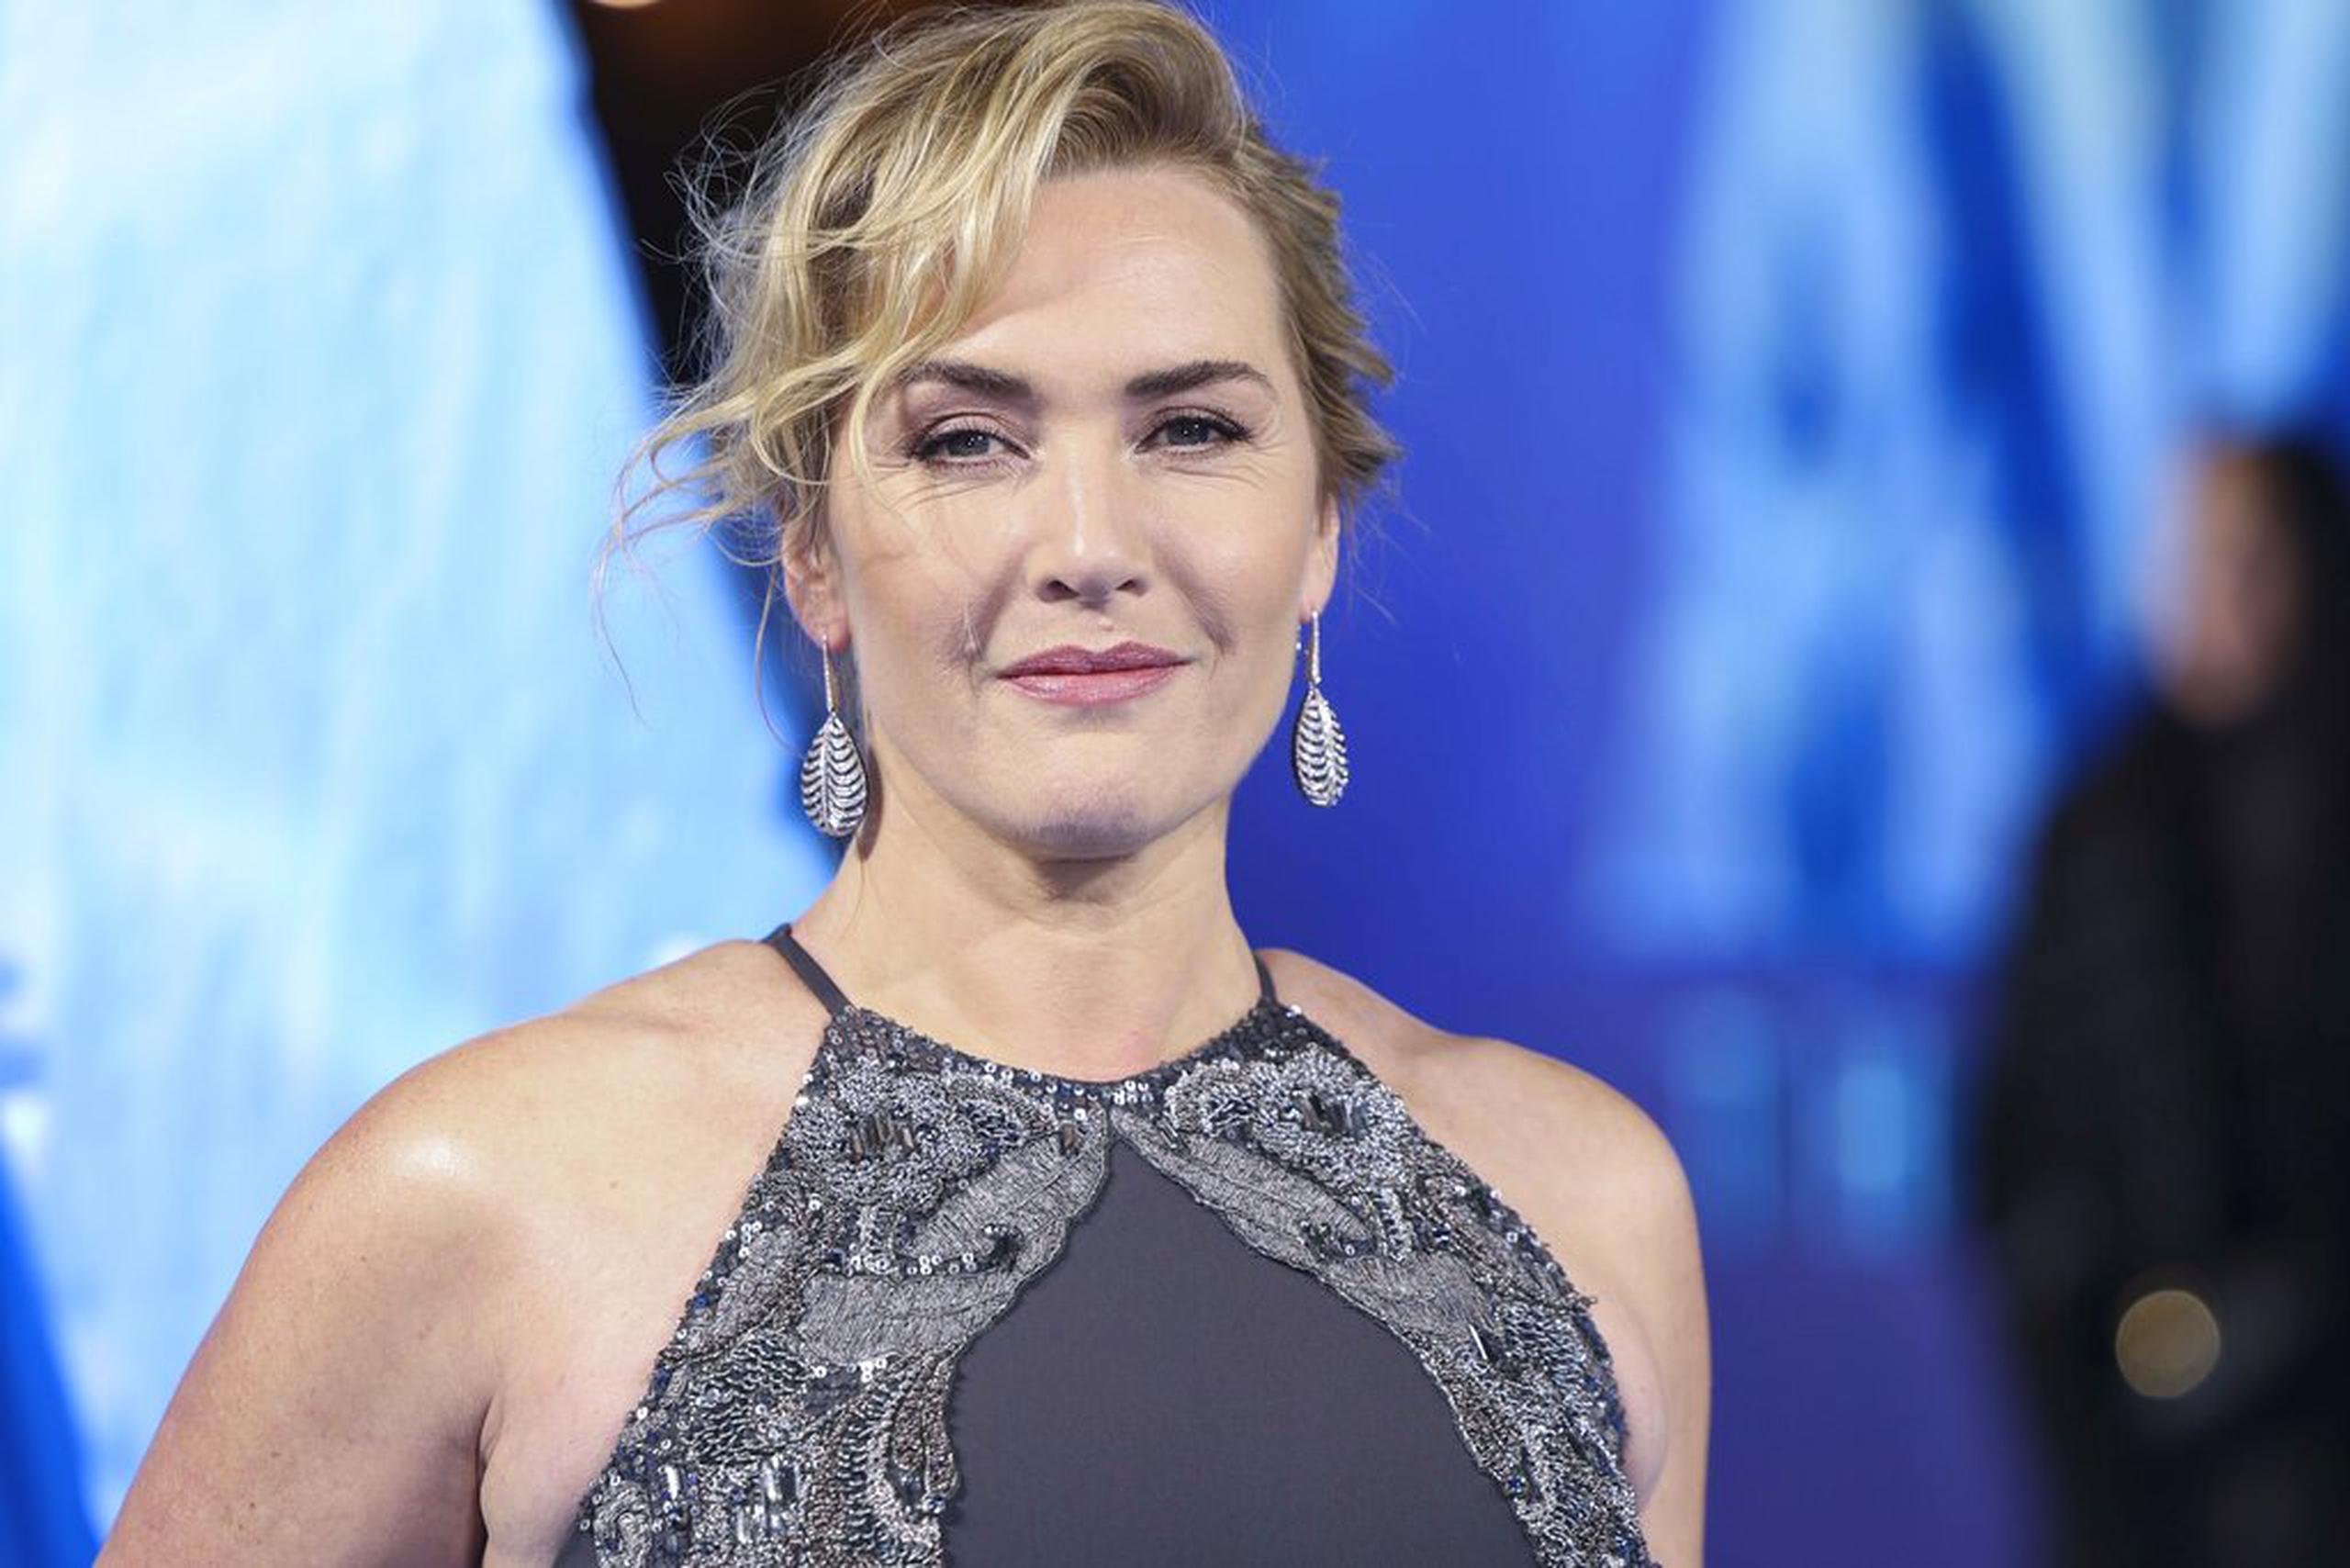 Kate Winslet poses for photographers upon arrival at the World premiere of the film 'Avatar: The Way of Water' in London, Tuesday, Dec. 6, 2022. (Photo by Vianney Le Caer/Invision/AP)